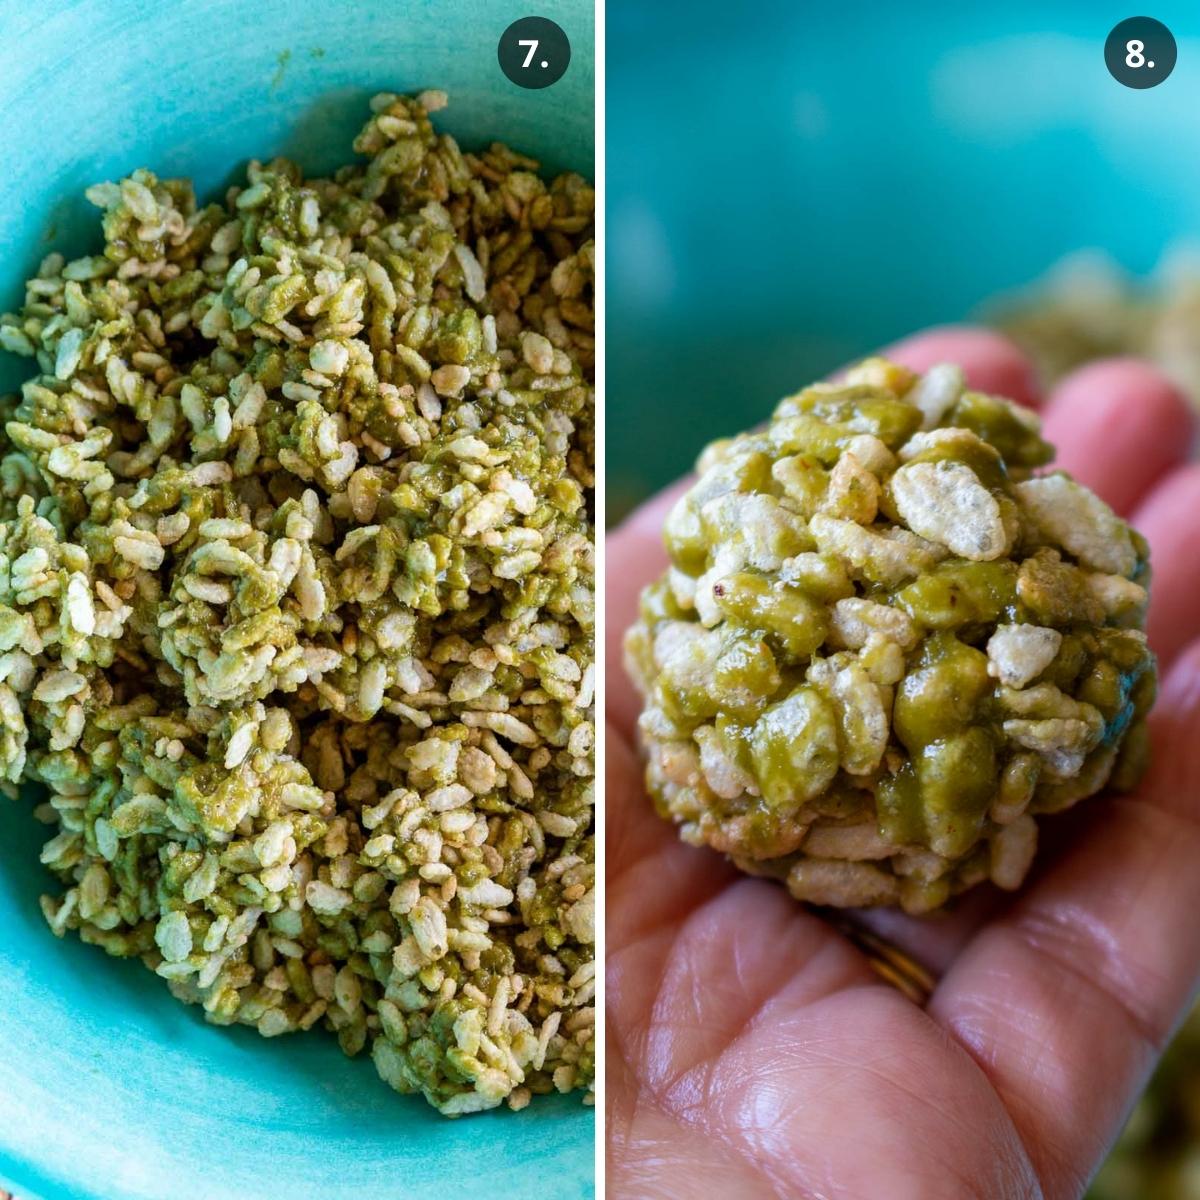 Mixing and rolling matcha rice cereal treats into balls.